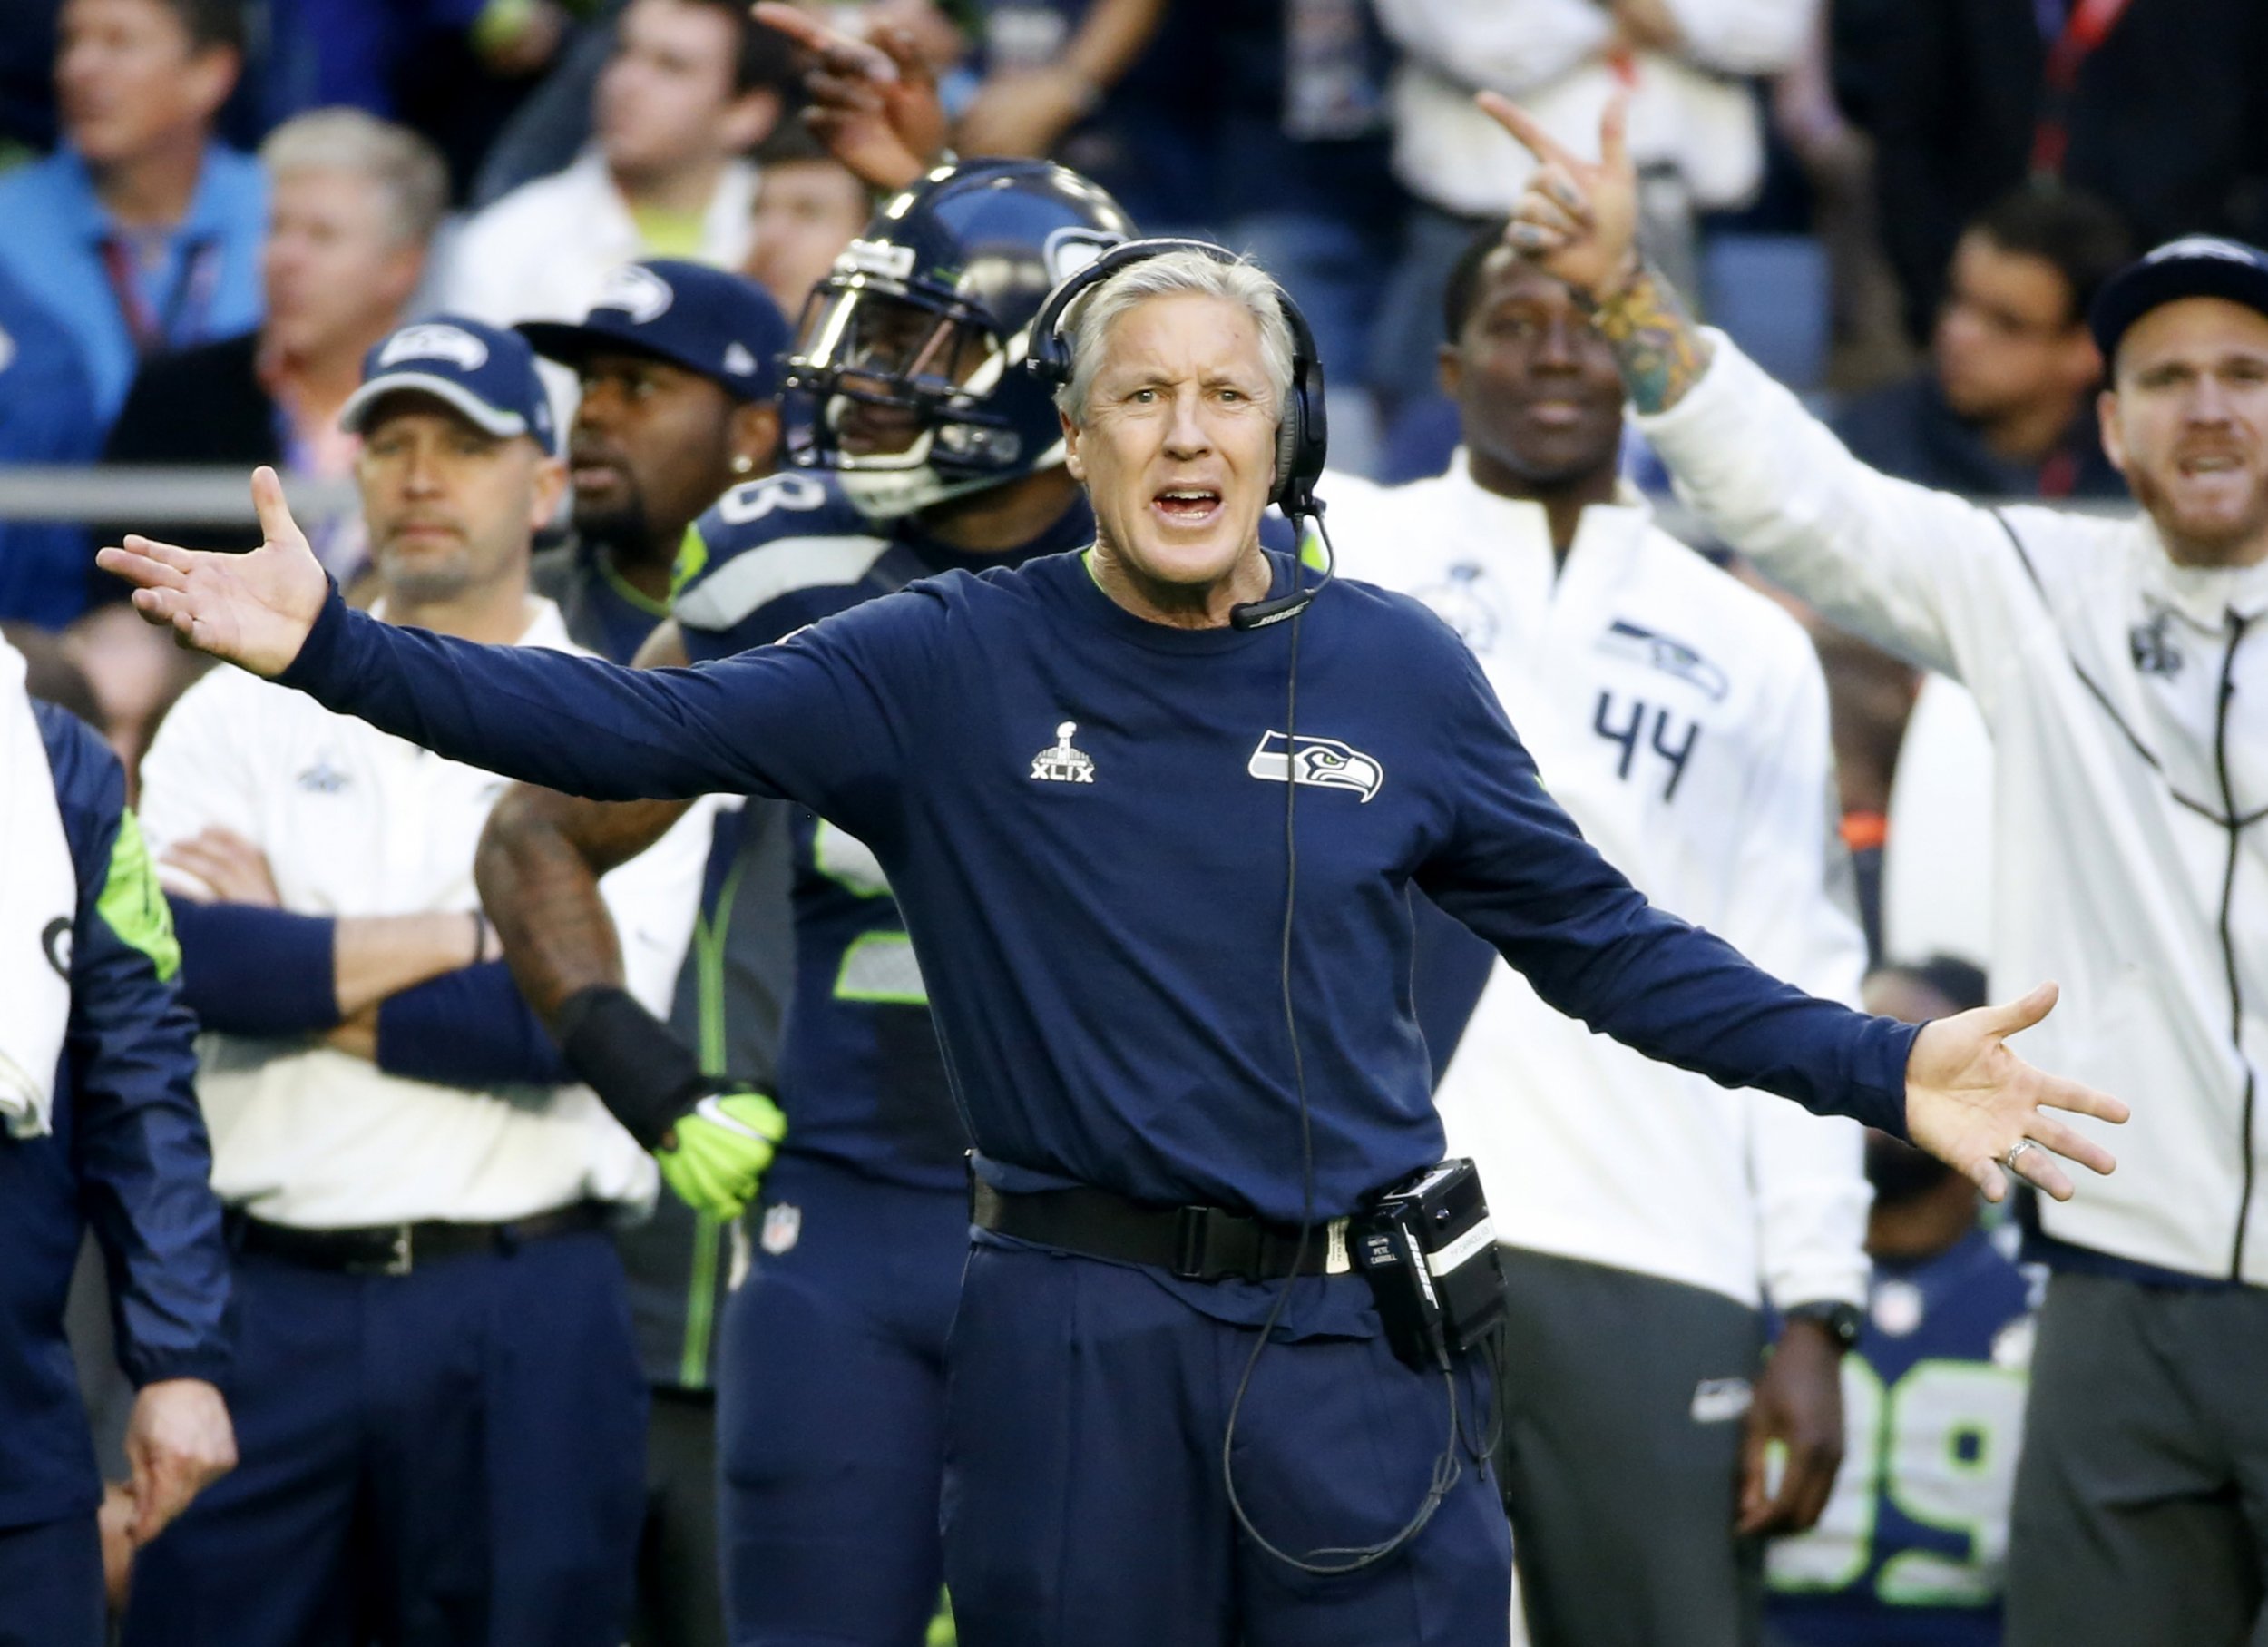 Super Bowl winners: Seahawks add themselves to list of champions 